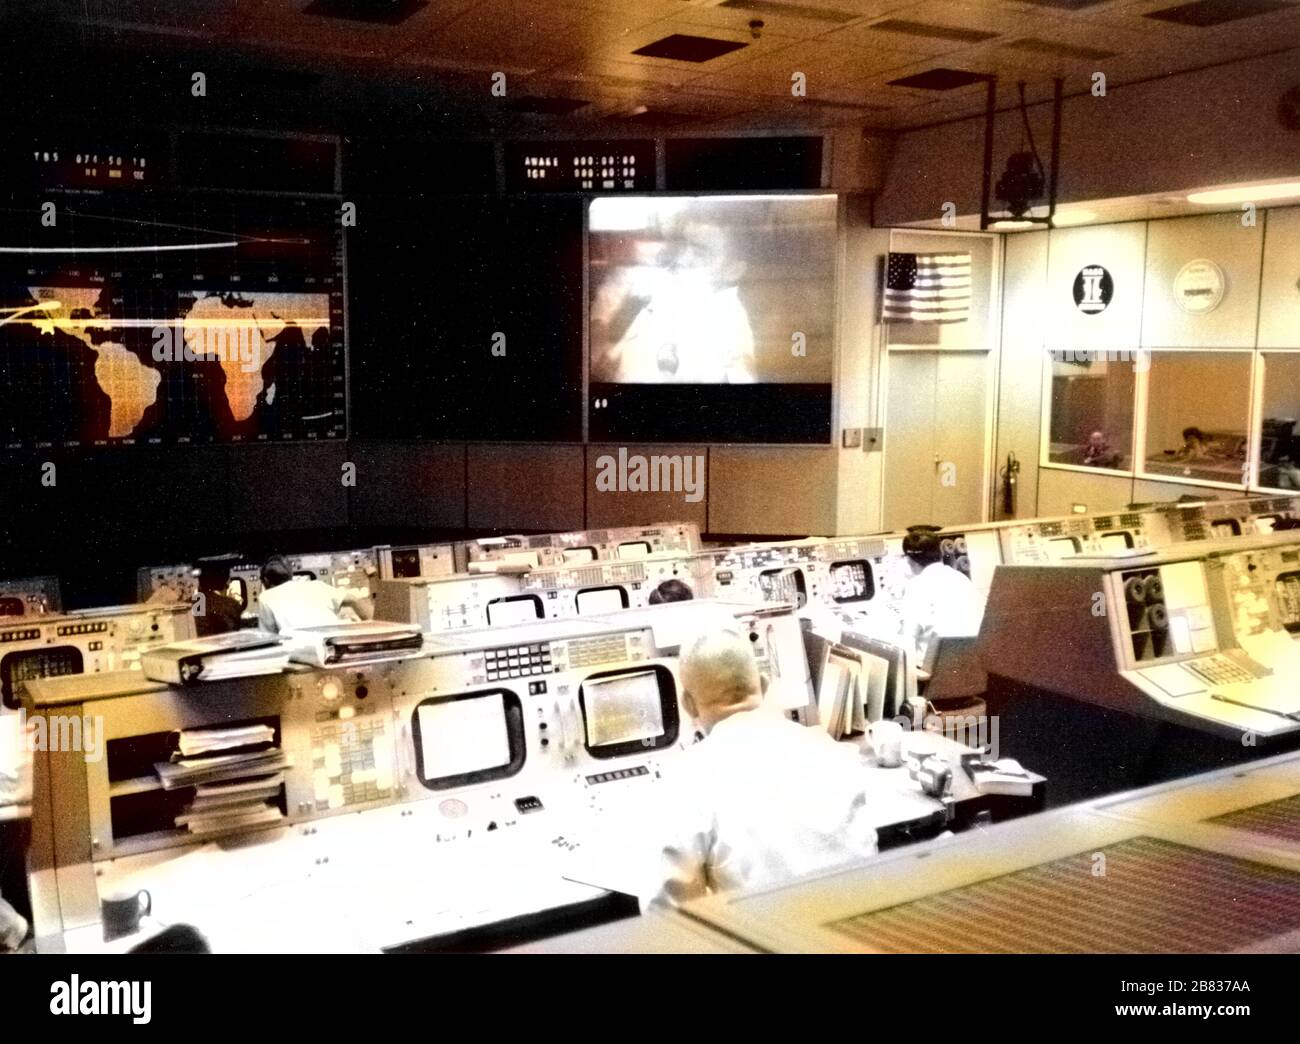 Photograph of the Apollo 13 Mission Operations Control Room in the Mission Control Center at the Manned Spacecraft Center, Huston, Texas, Eugene F. Kranz and Fred W. Haise Jr, 1970. Image courtesy National Aeronautics and Space Administration (NASA). Note: Image has been digitally colorized using a modern process. Colors may not be period-accurate. () Stock Photo